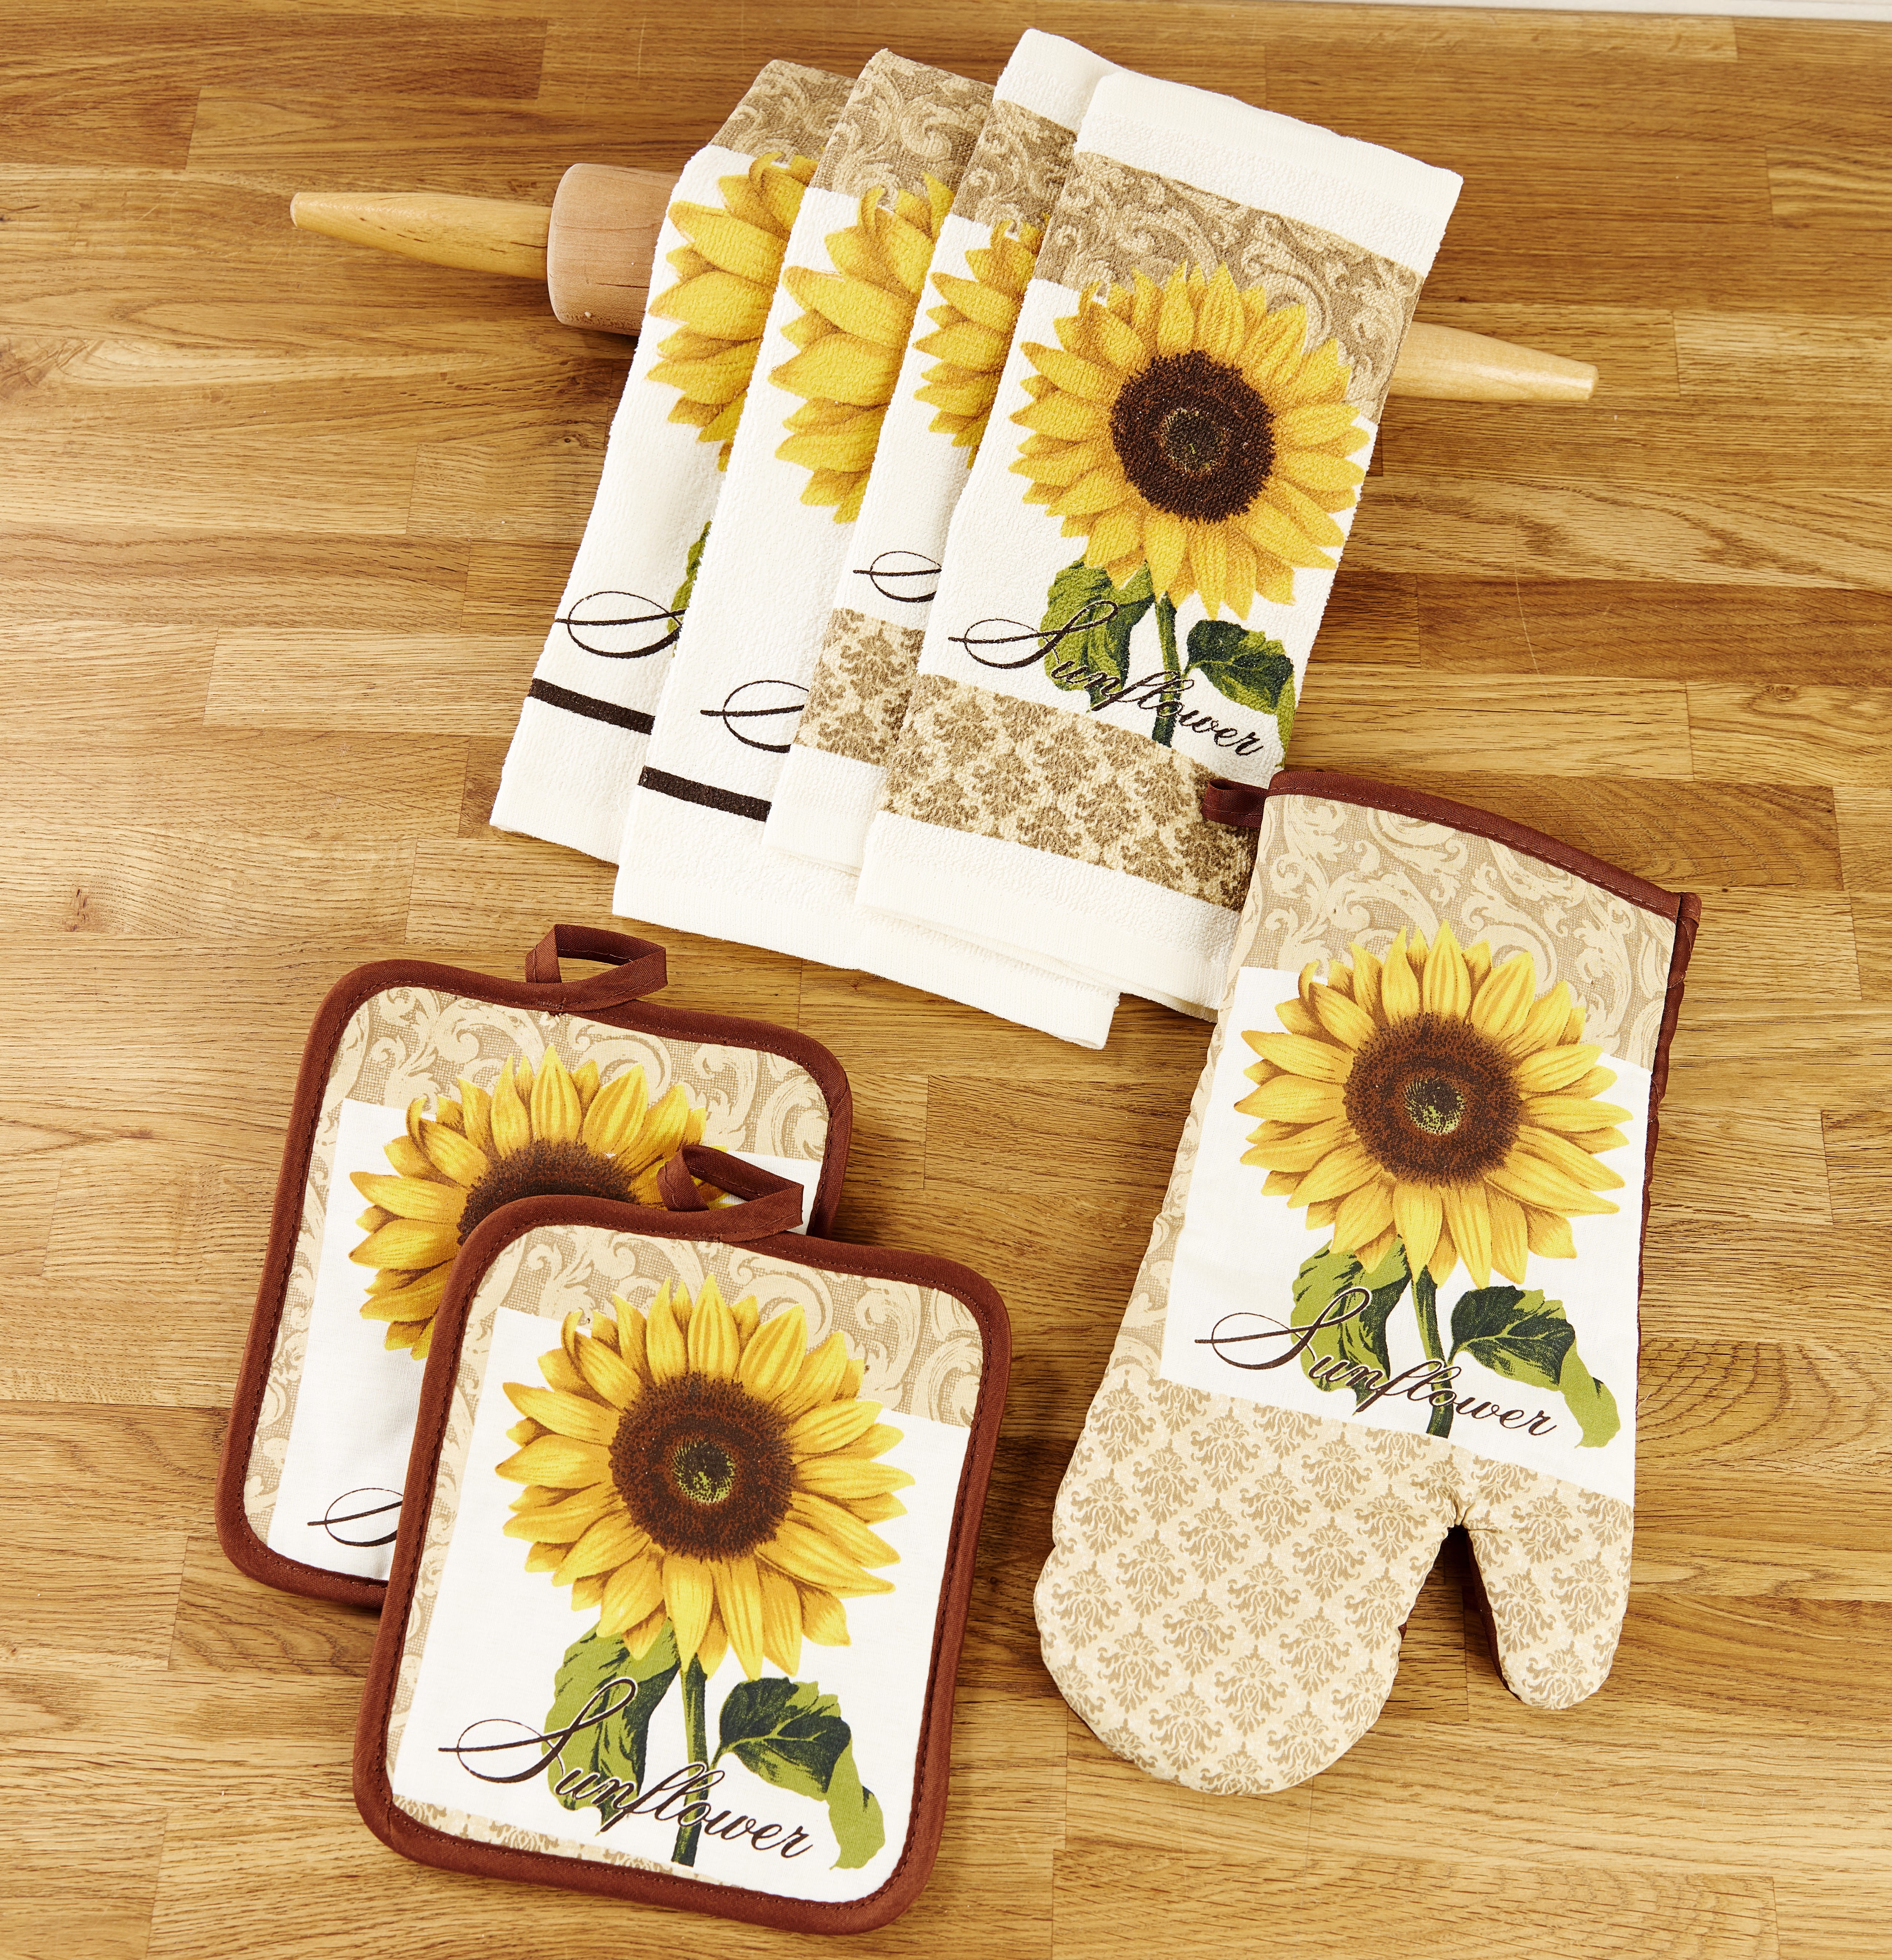 8PCS Sunflower Decor Themed Kitchen Set,1 Sunflower Waterproof Apron,2 Absorbent Towels,1 Oven Mitts,2 Pot Holders,1 12oz Slim Can Cooler,1 Keychain,Cooking Gift,Mom Gift,Wedding,Christmas Gifts 